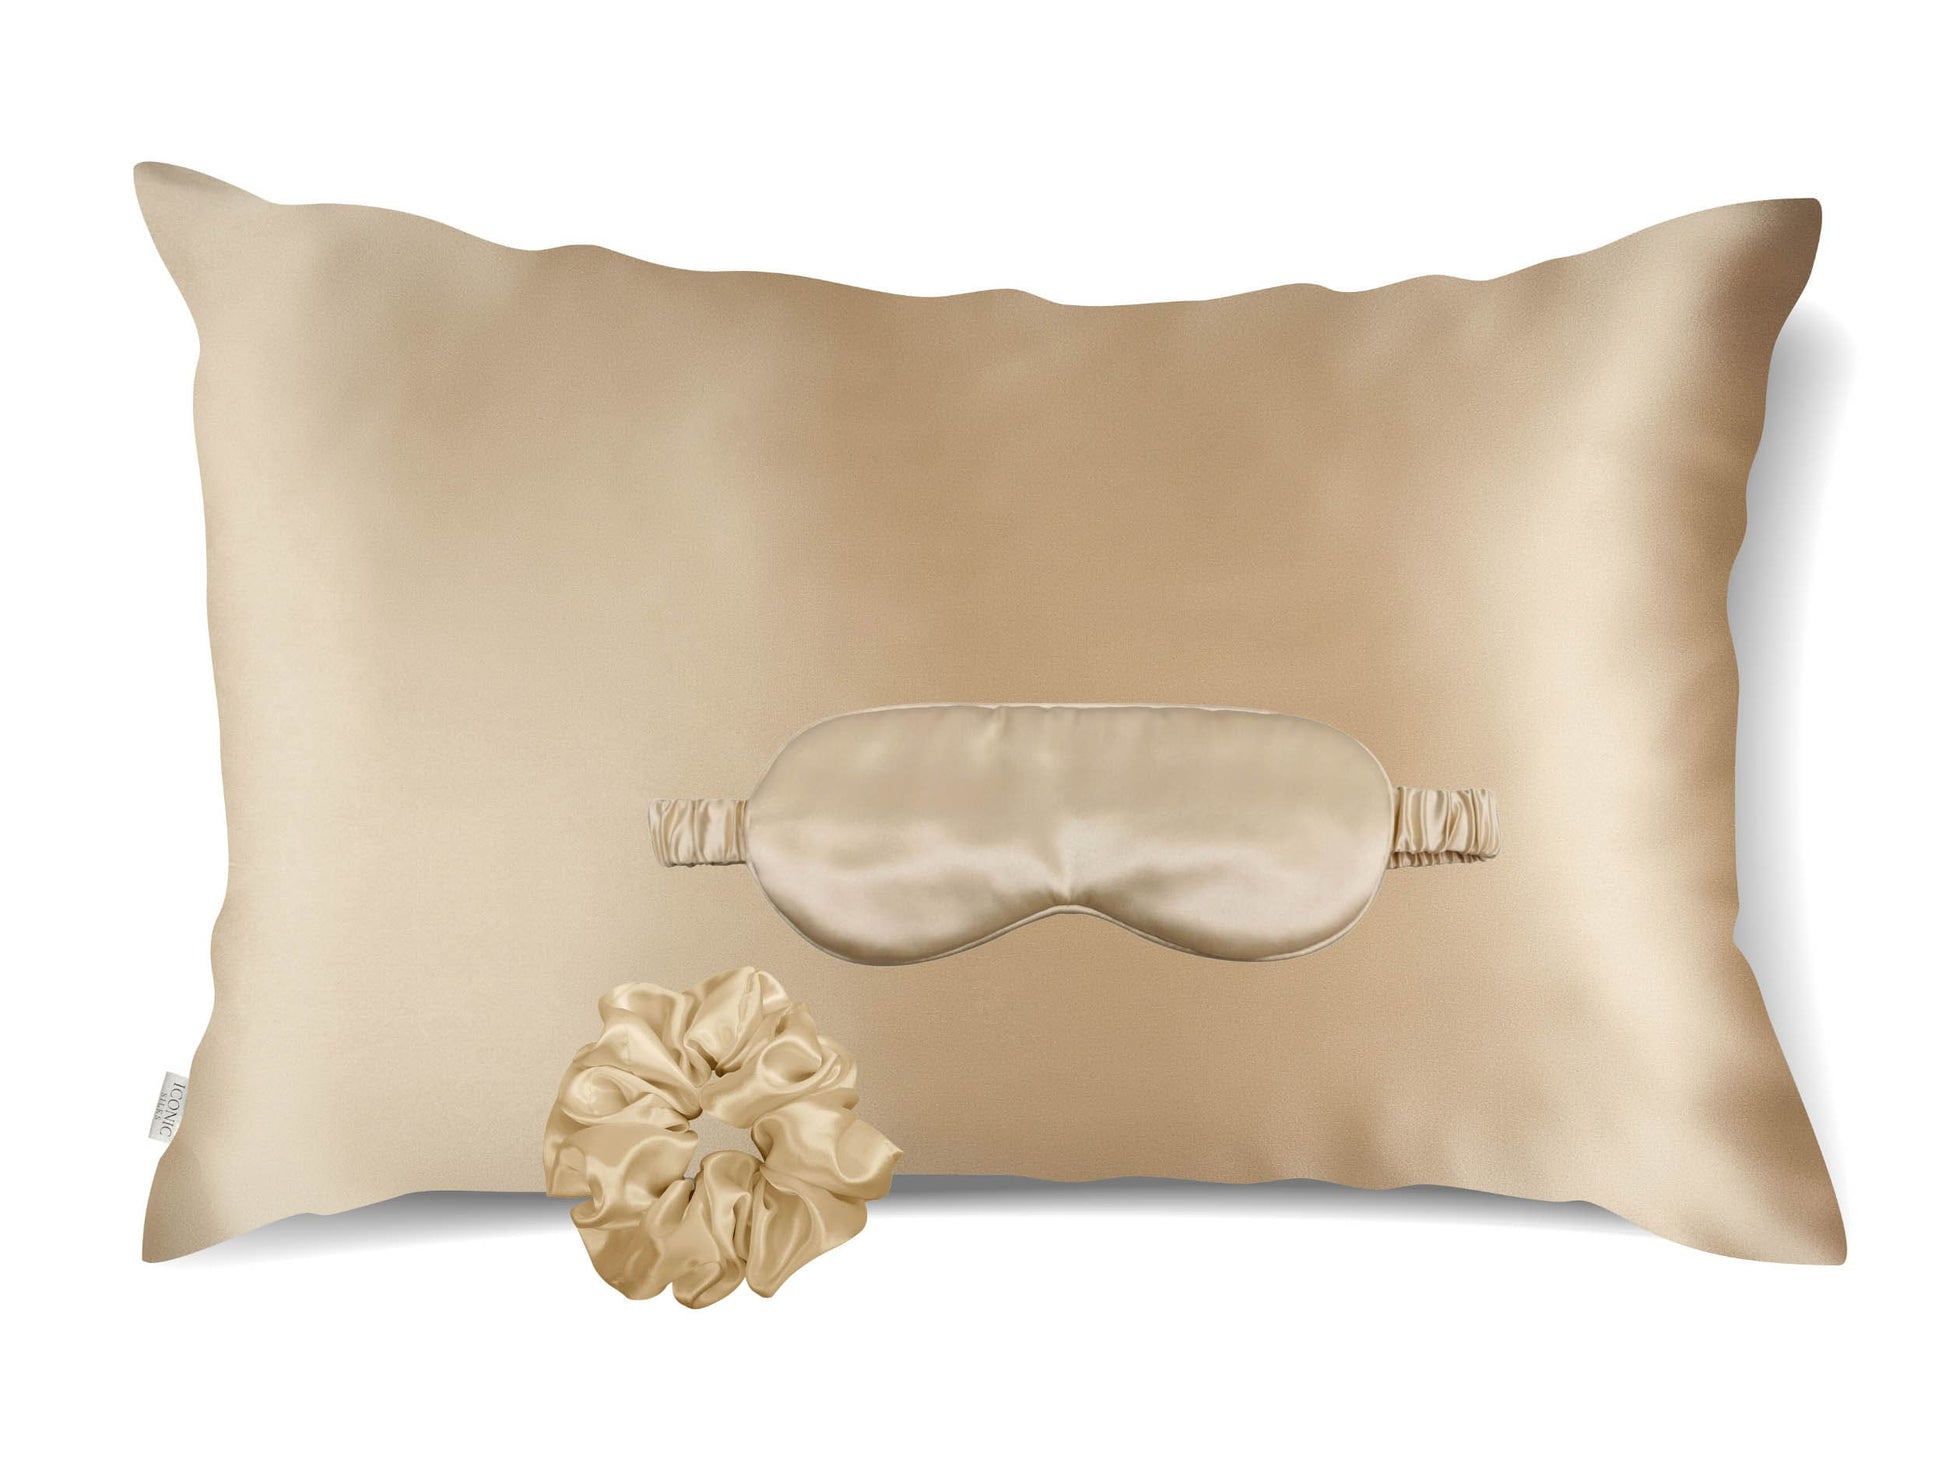 Experience the ultimate beauty sleep with our Hyaluronic Acid-infused silk set. Our luxurious silk pillowcase, eye mask, and scrunchie are all infused with skin-loving Hyaluronic Acid to help hydrate, plump, and soothe your skin and hair as you sleep. Wake up feeling refreshed and rejuvenated with the power of Hyaluronic Acid and the silky smoothness of our high-quality silk fiber.